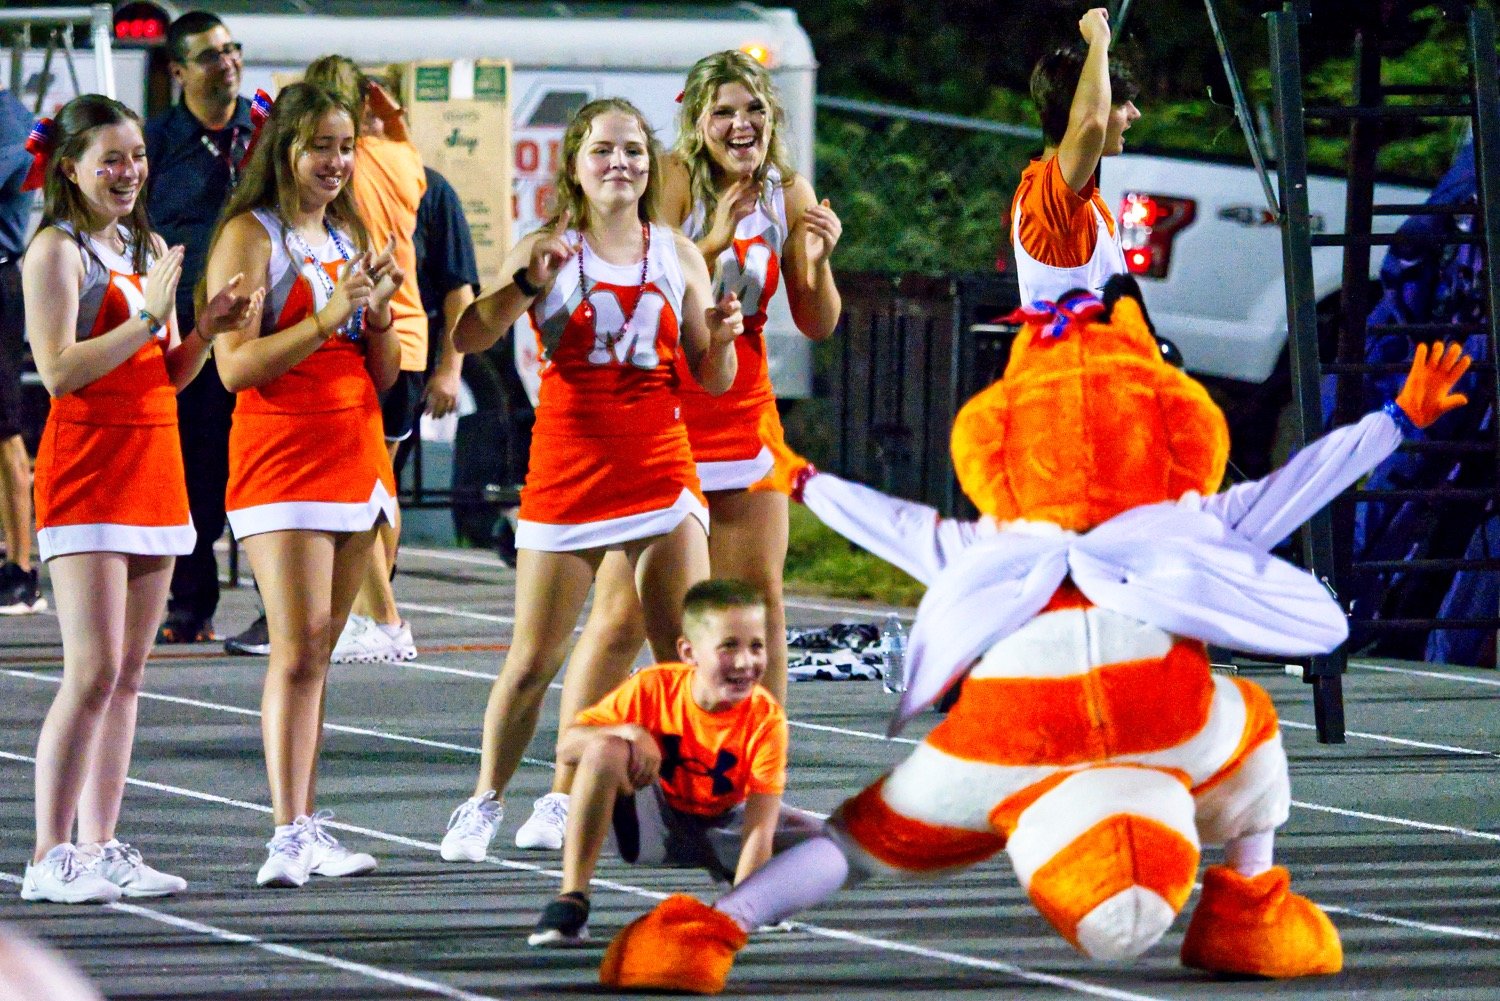 There's always a Buzz on the Mineola sidelines.